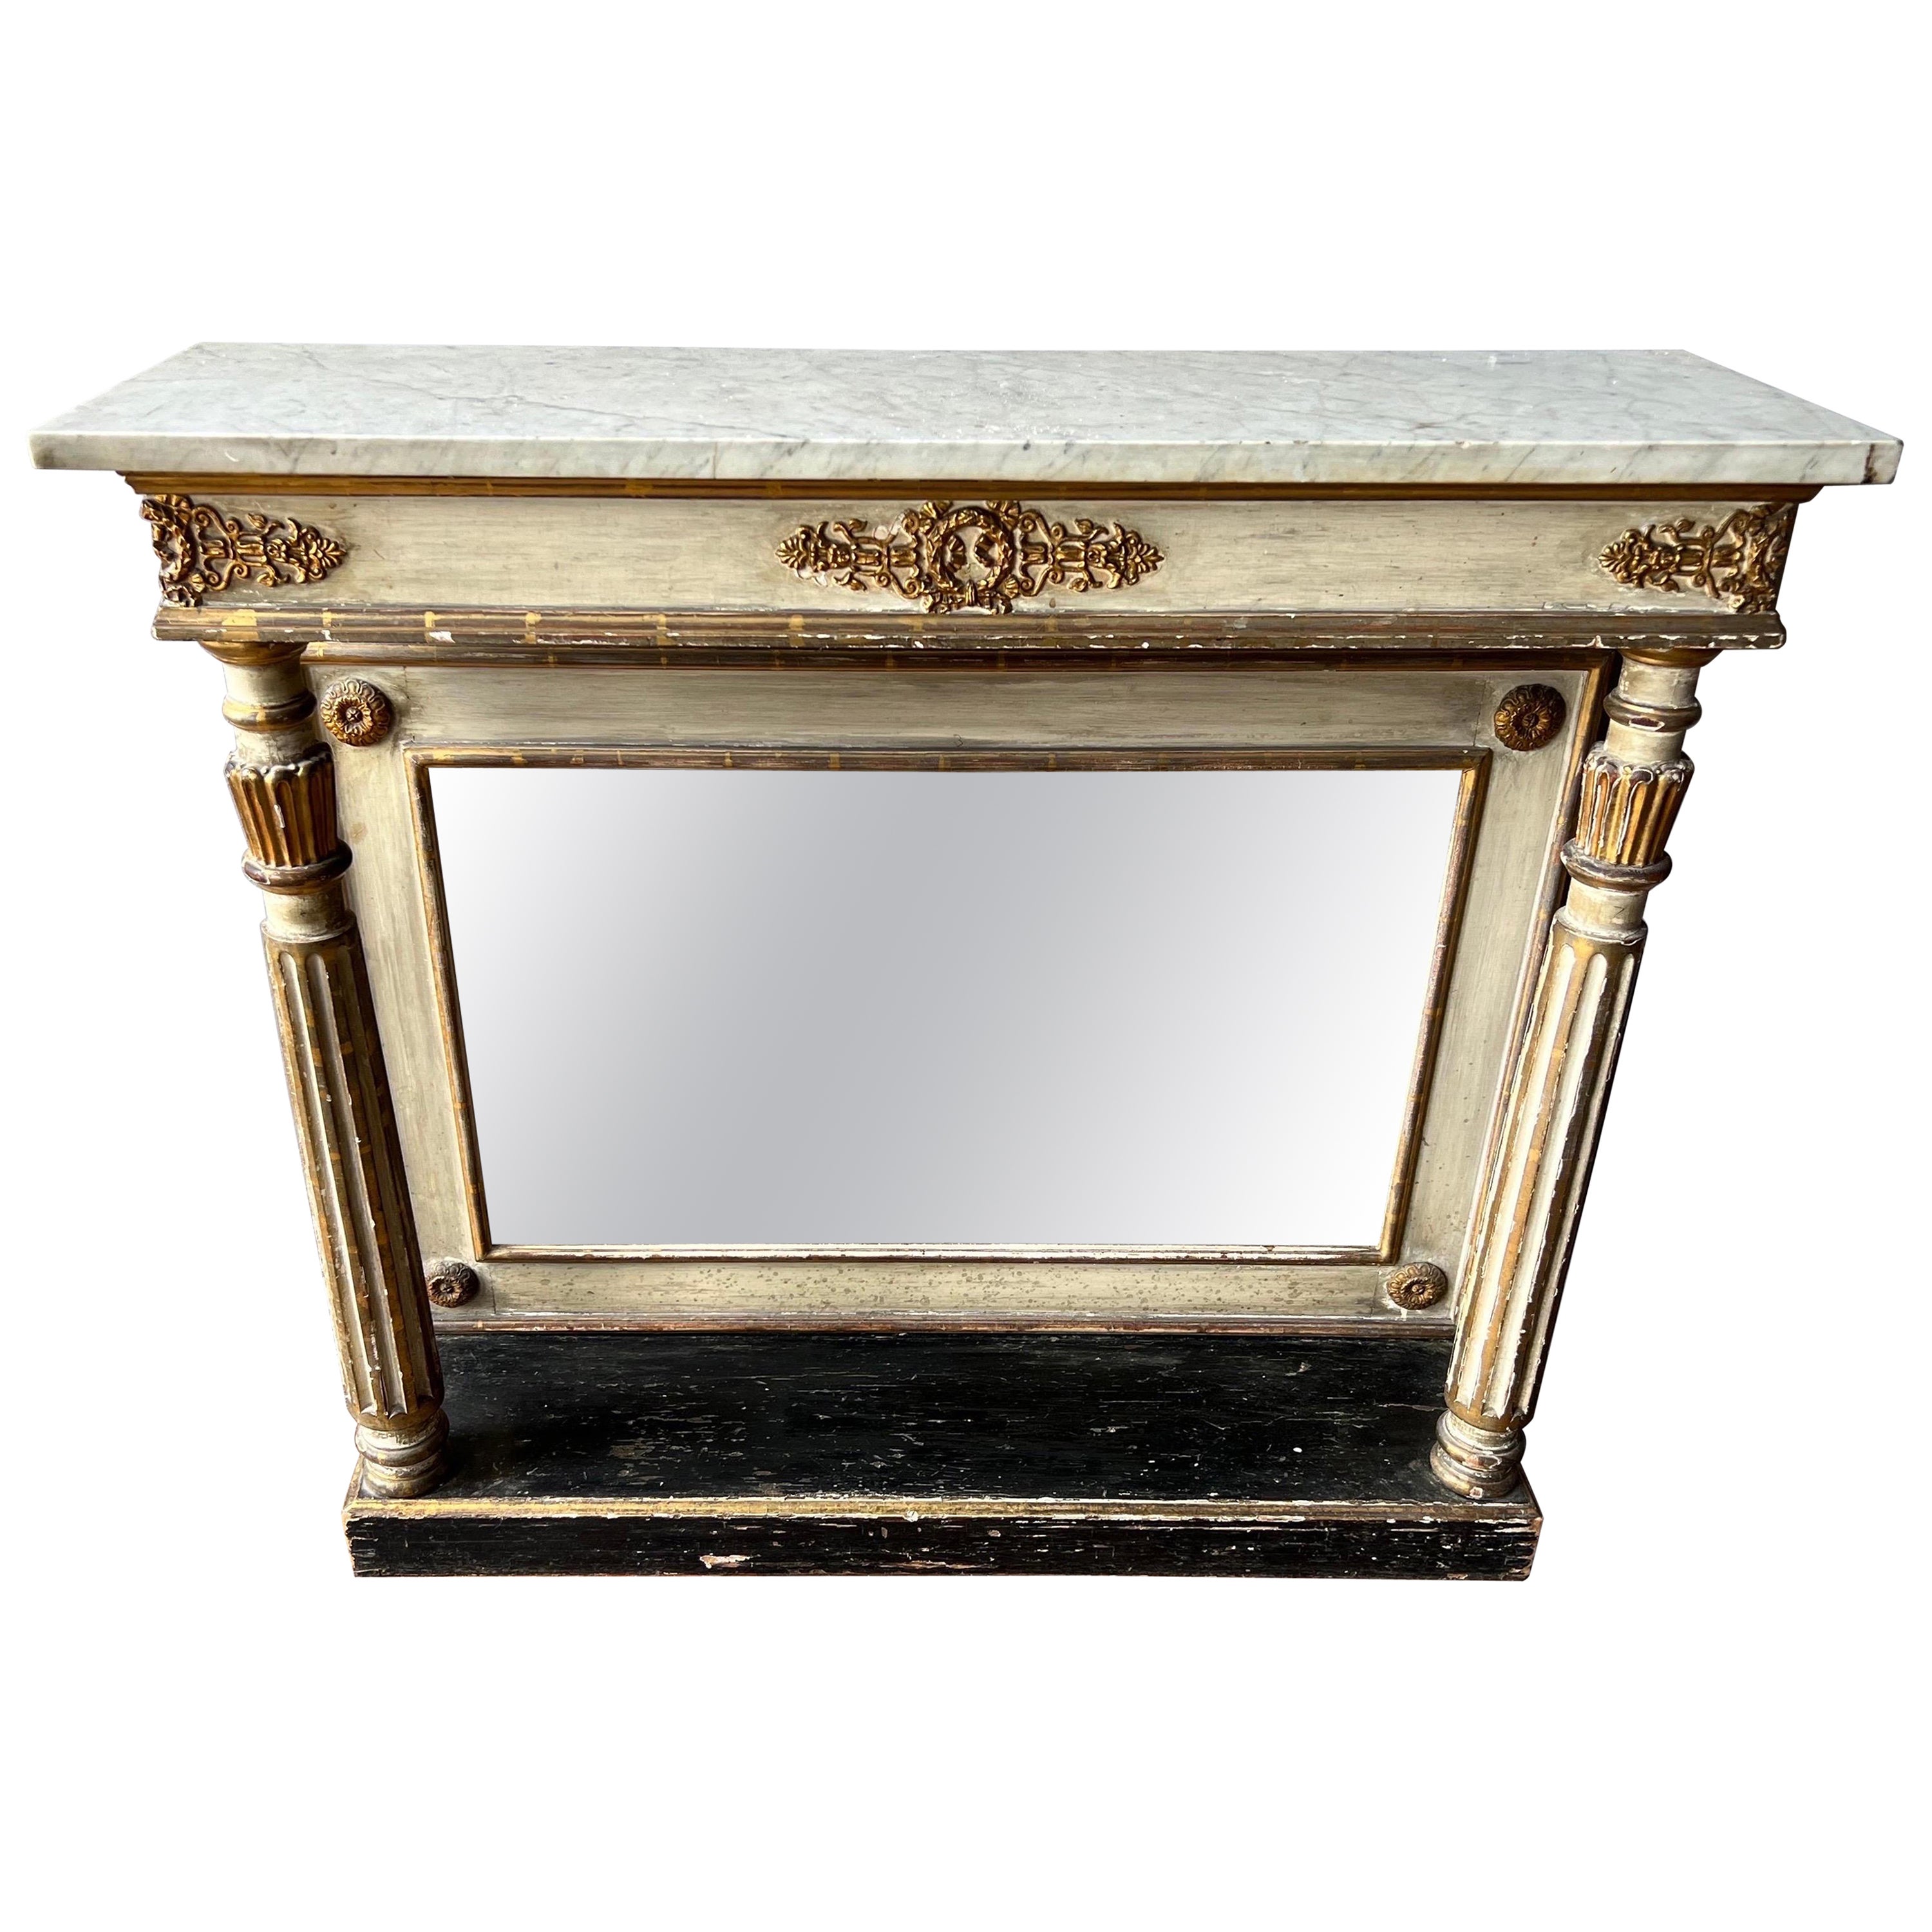 Late 18th, Early 19th Century French Painted and Giltwood Mirrored Console For Sale